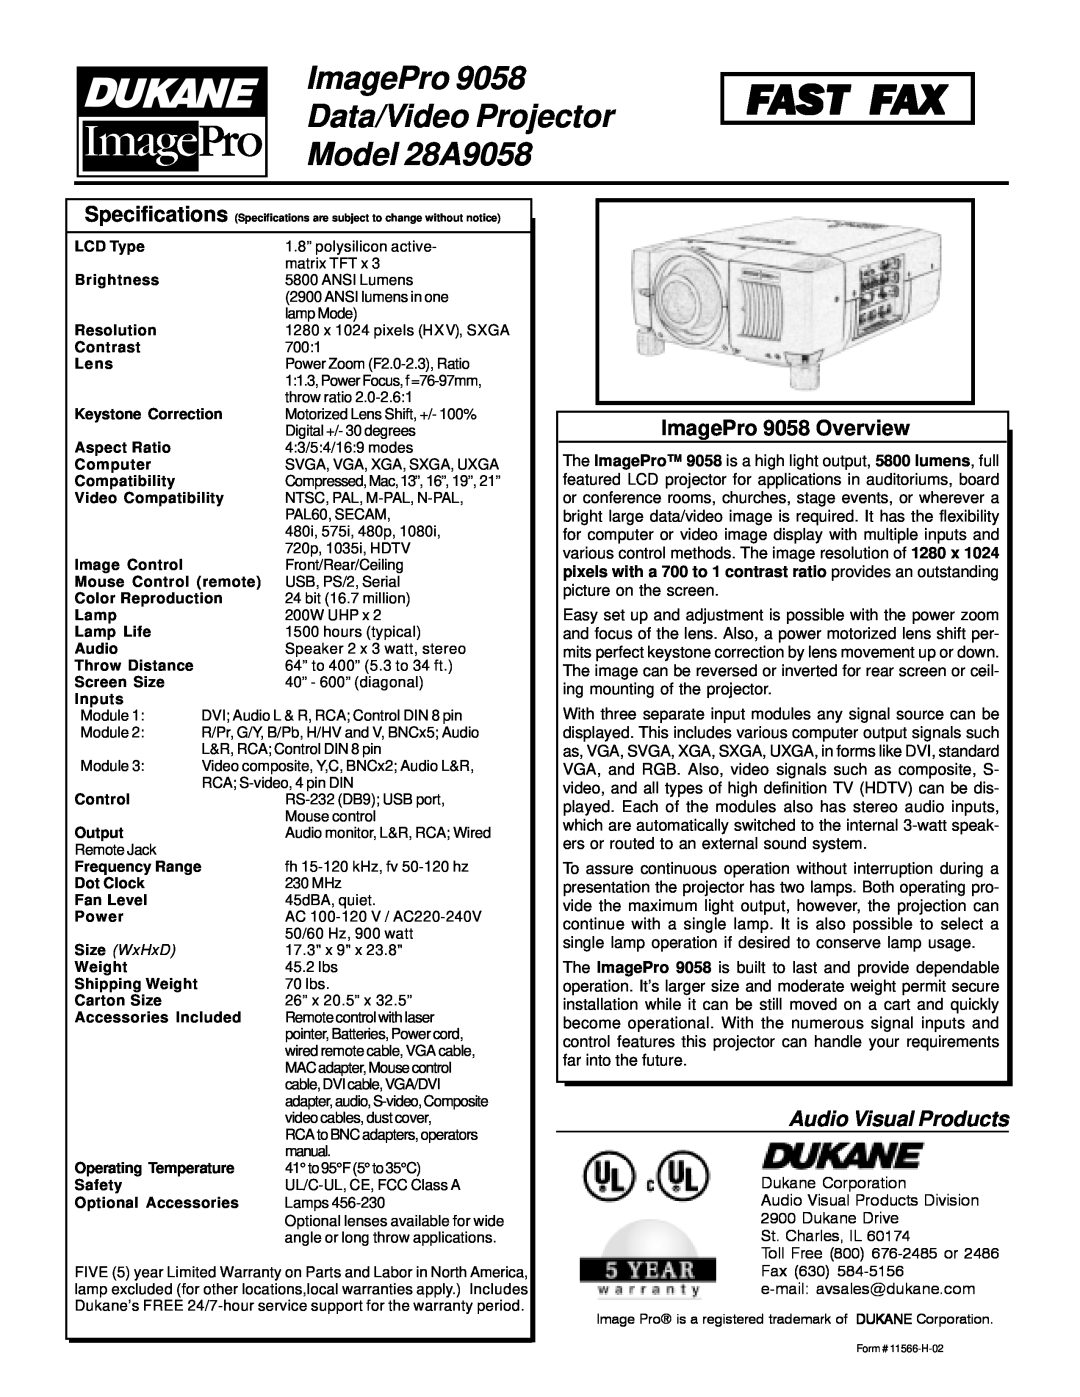 Dukane Fast Fax, ImagePro Data/Video Projector Model 28A9058, ImagePro 9058 Overview, Audio Visual Products 